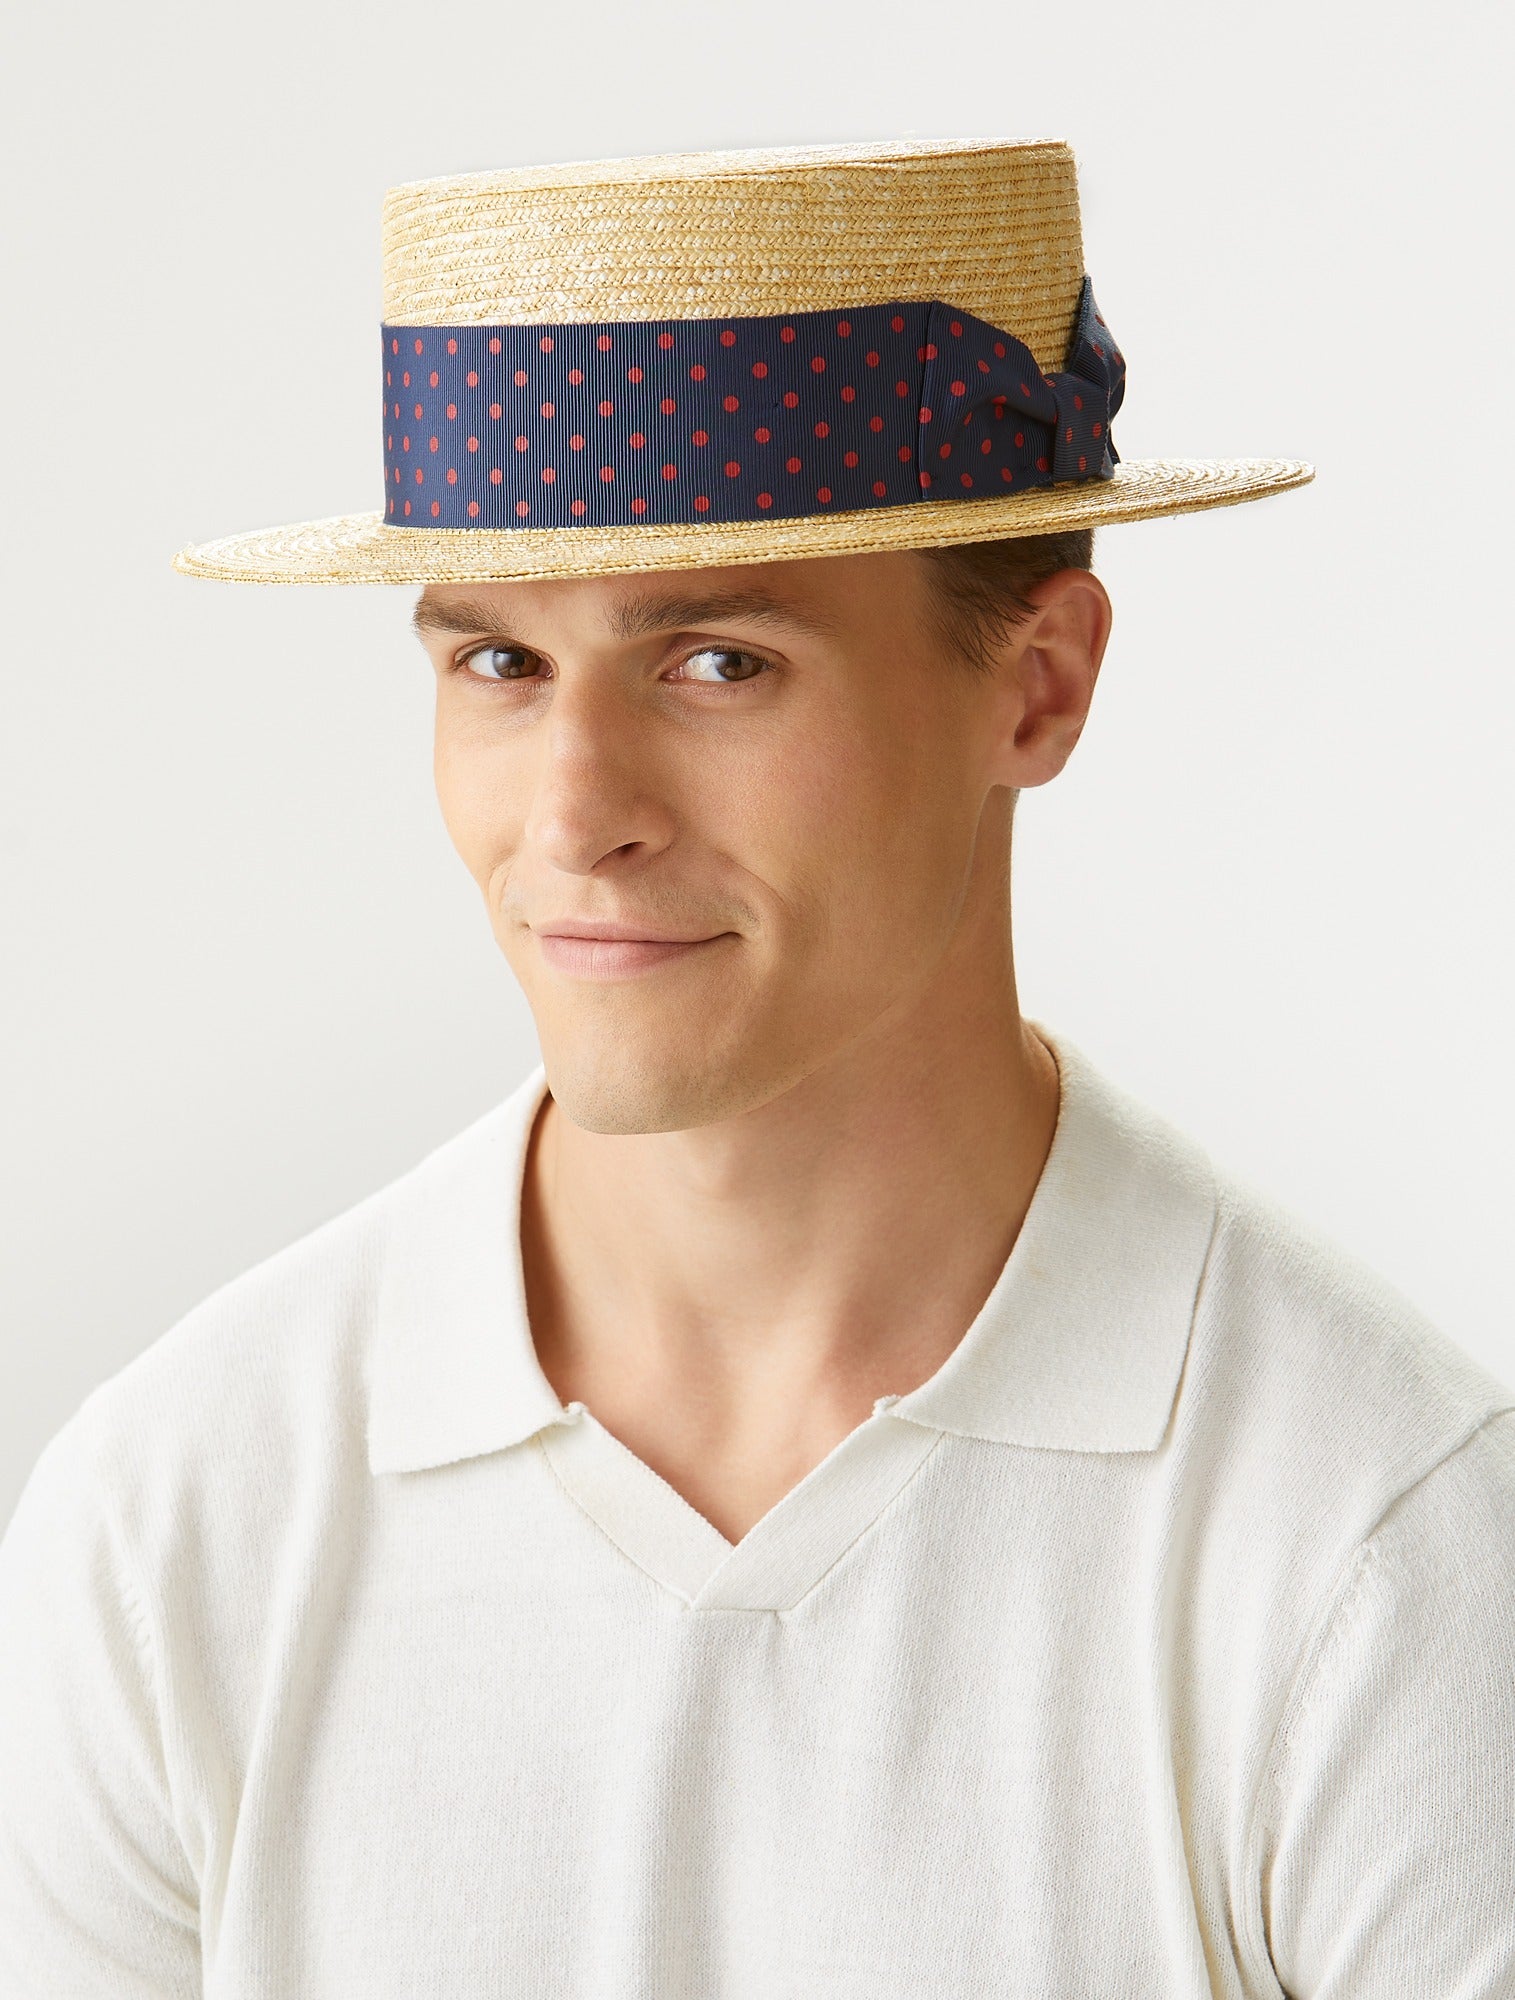 Oxford Boater - Panamas, Straw and Sun Hats for Men - Lock & Co. Hatters London UK